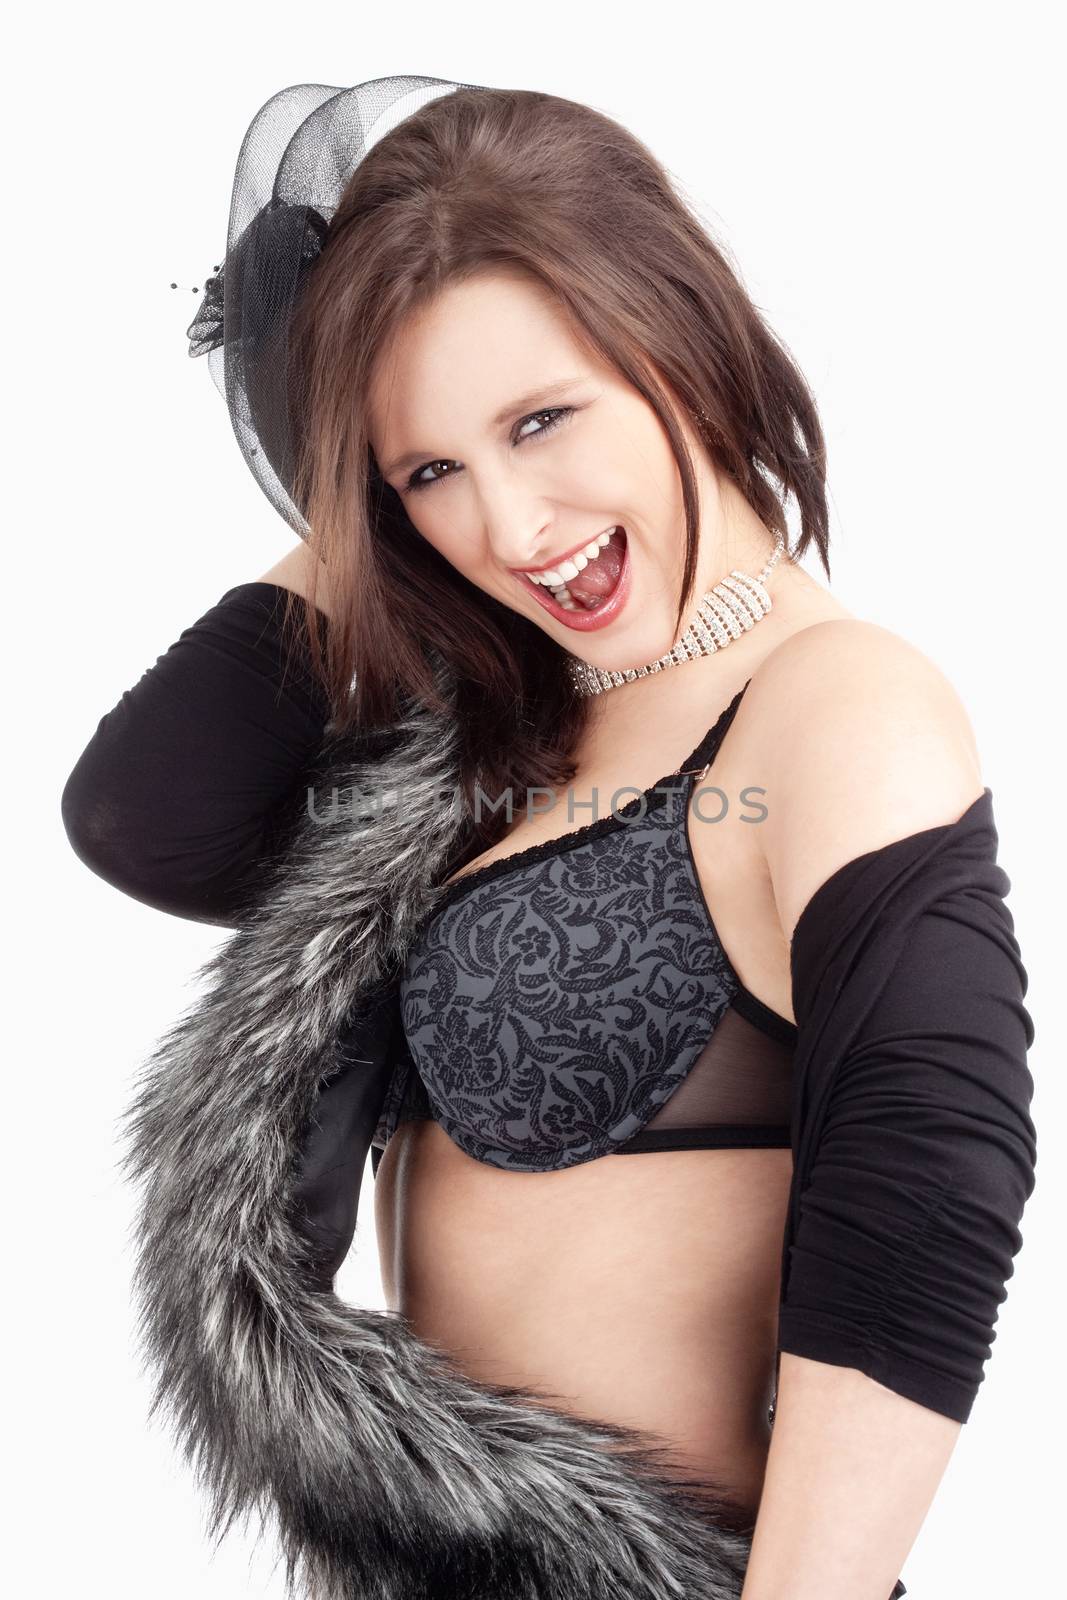 Young Woman with Hat and Fur in her Bra, Smiling by courtyardpix